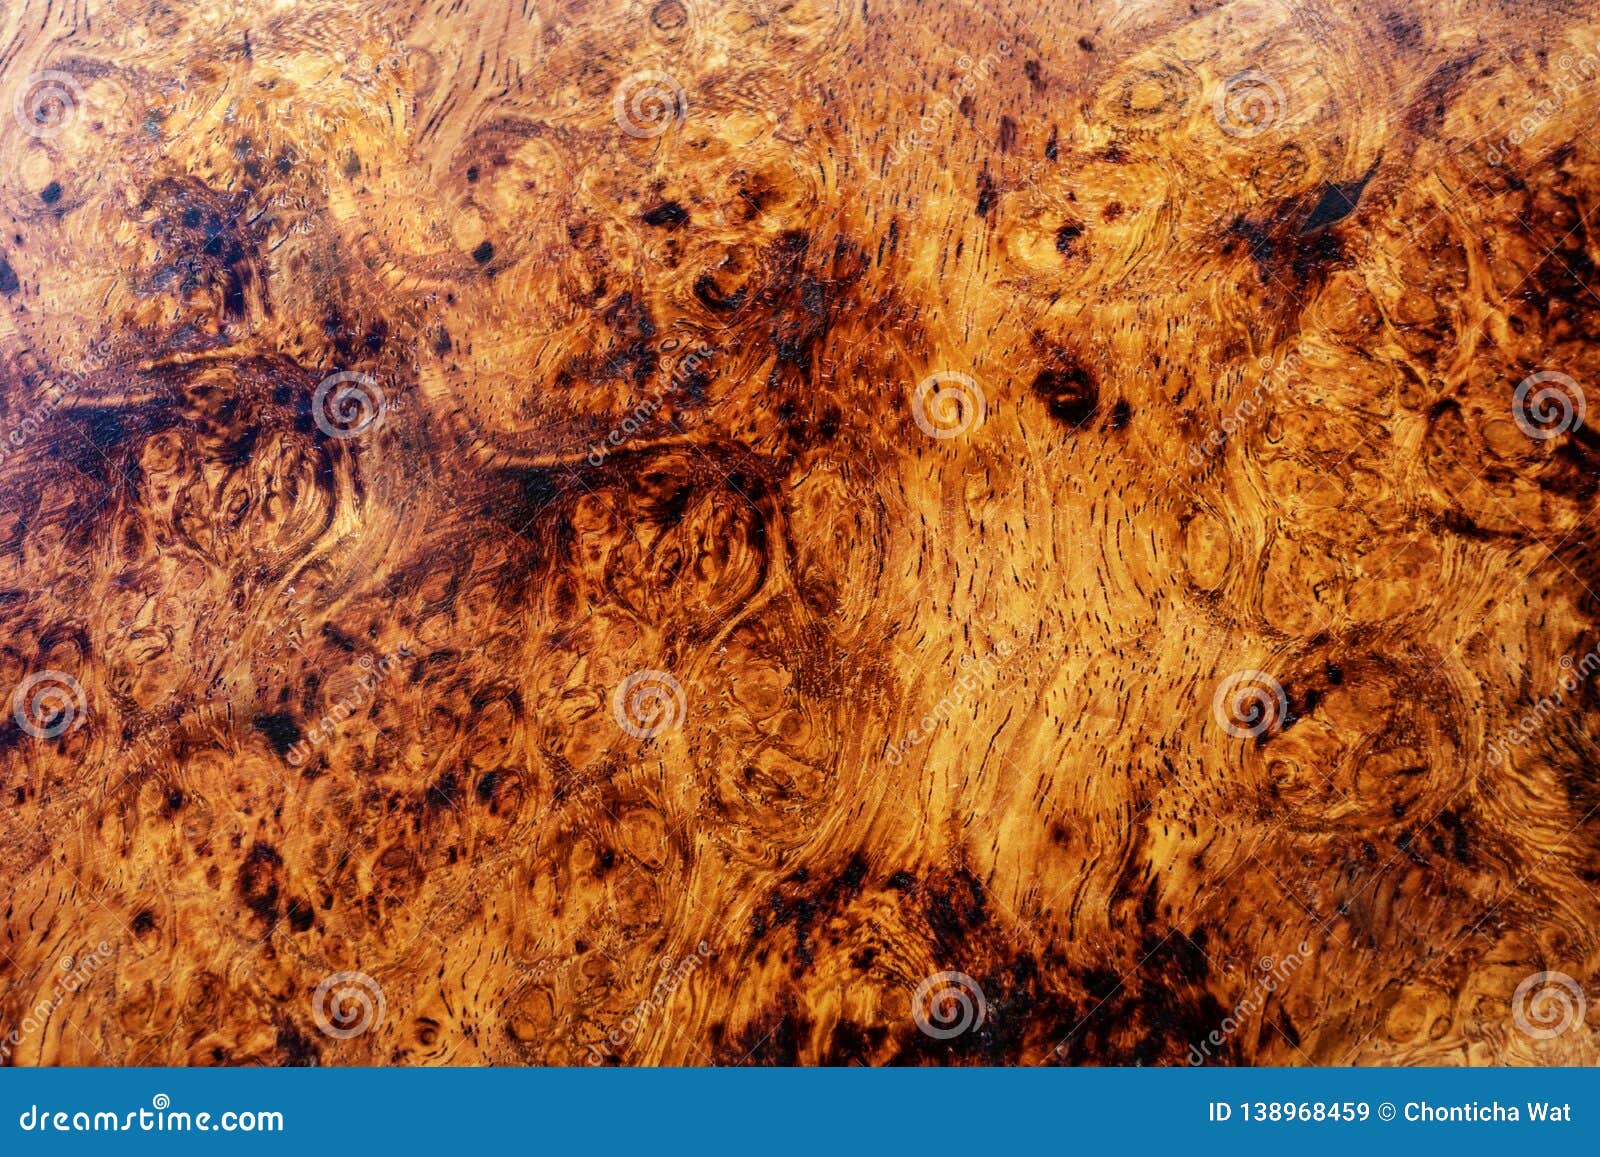 burl wood striped for picture prints interior decoration car, exotic wooden beautiful pattern for crafts or abstract art t